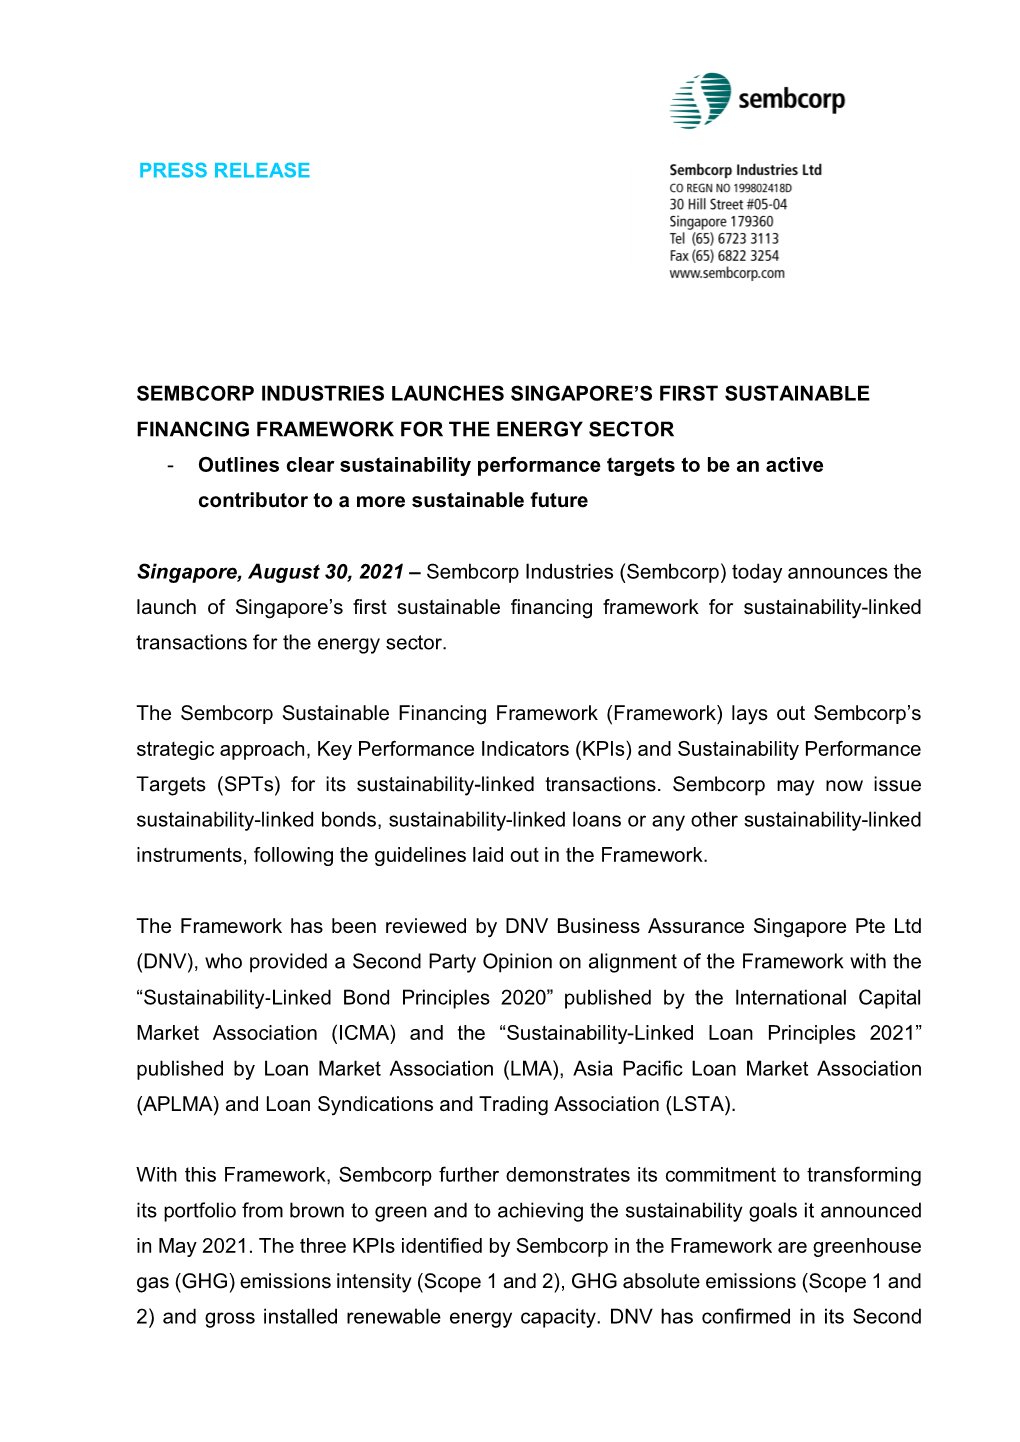 Press Release Sembcorp Industries Launches